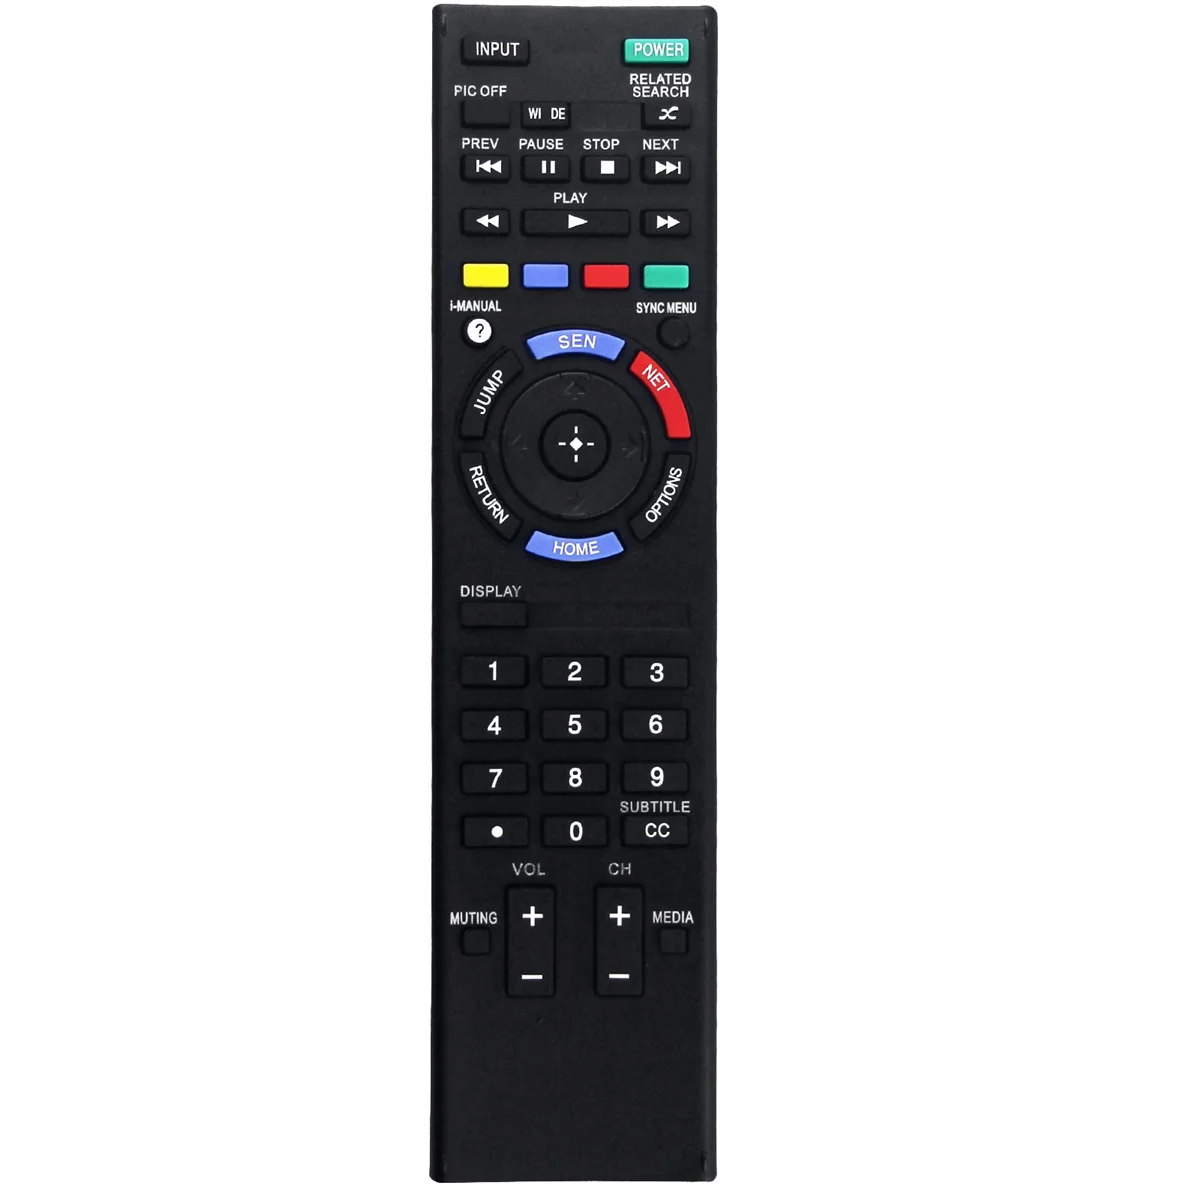 

RM-YD089 Replace Remote for Sony TV KDL-32W600A KDL-32W650A KDL-42W650A KDL-42W651A KDL-46W700A KDL-50W700A KDL32W600A